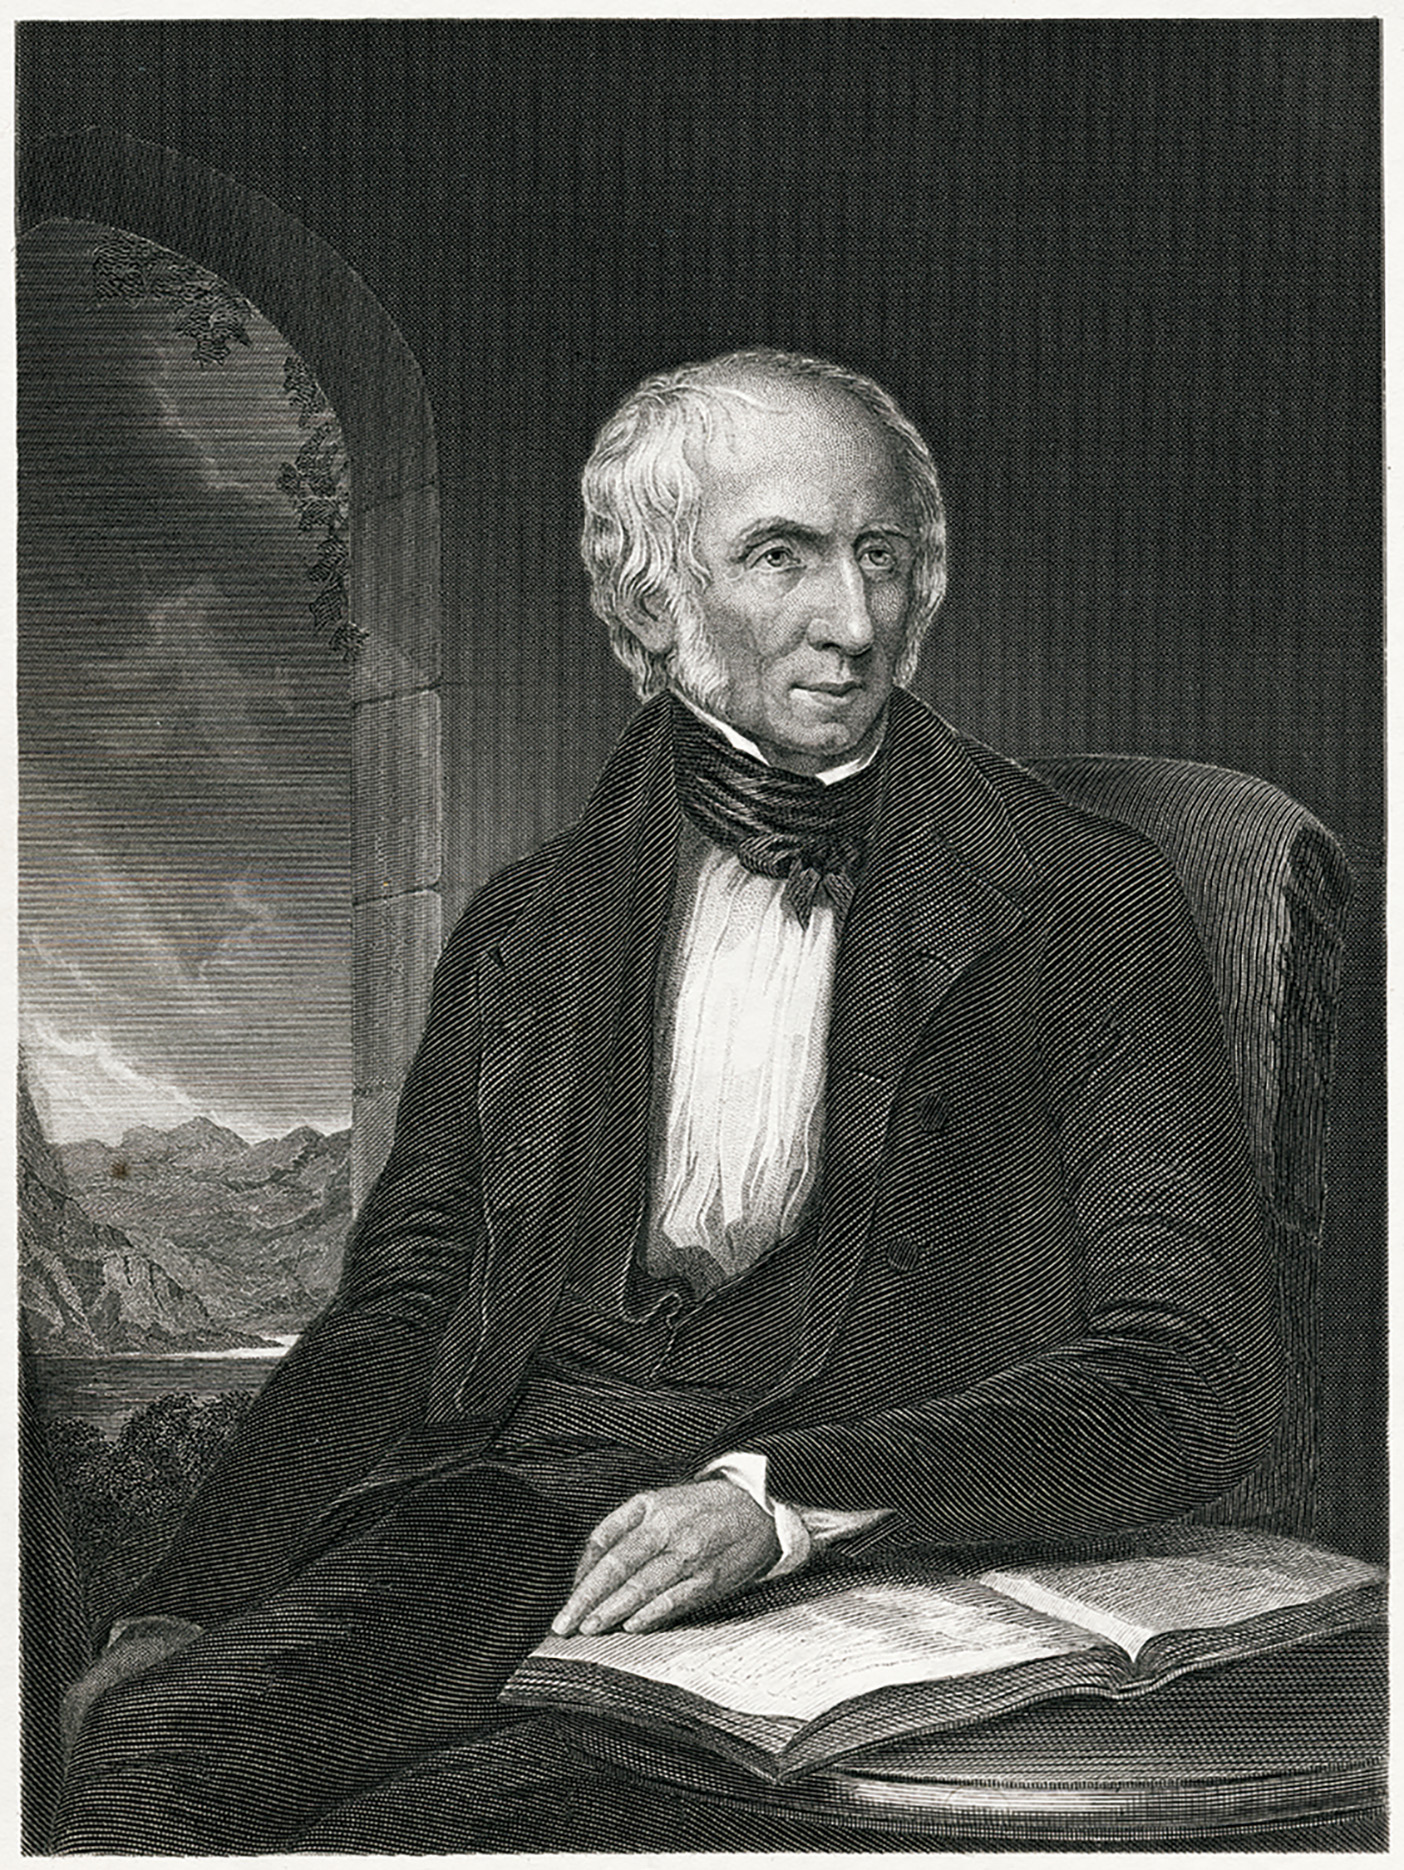 A portrait of Wordsworth